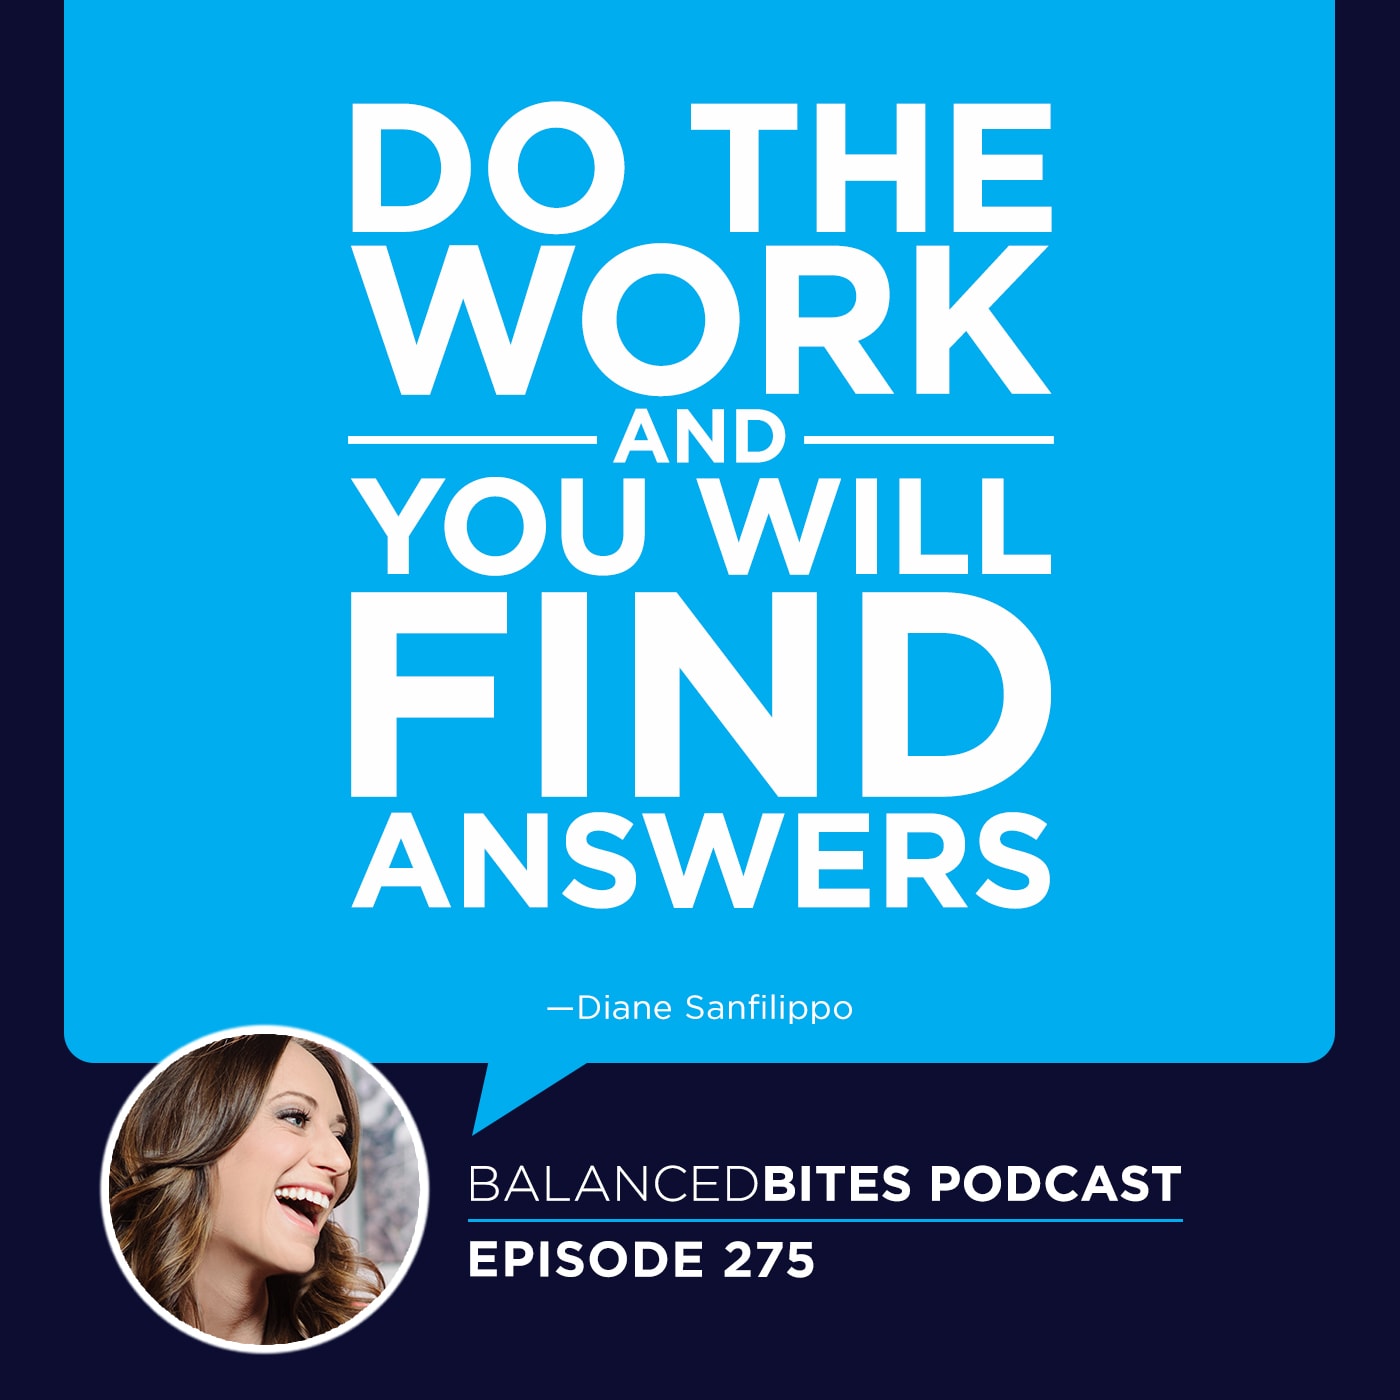 balanced-bites-podcast-quote-episode-275-answers